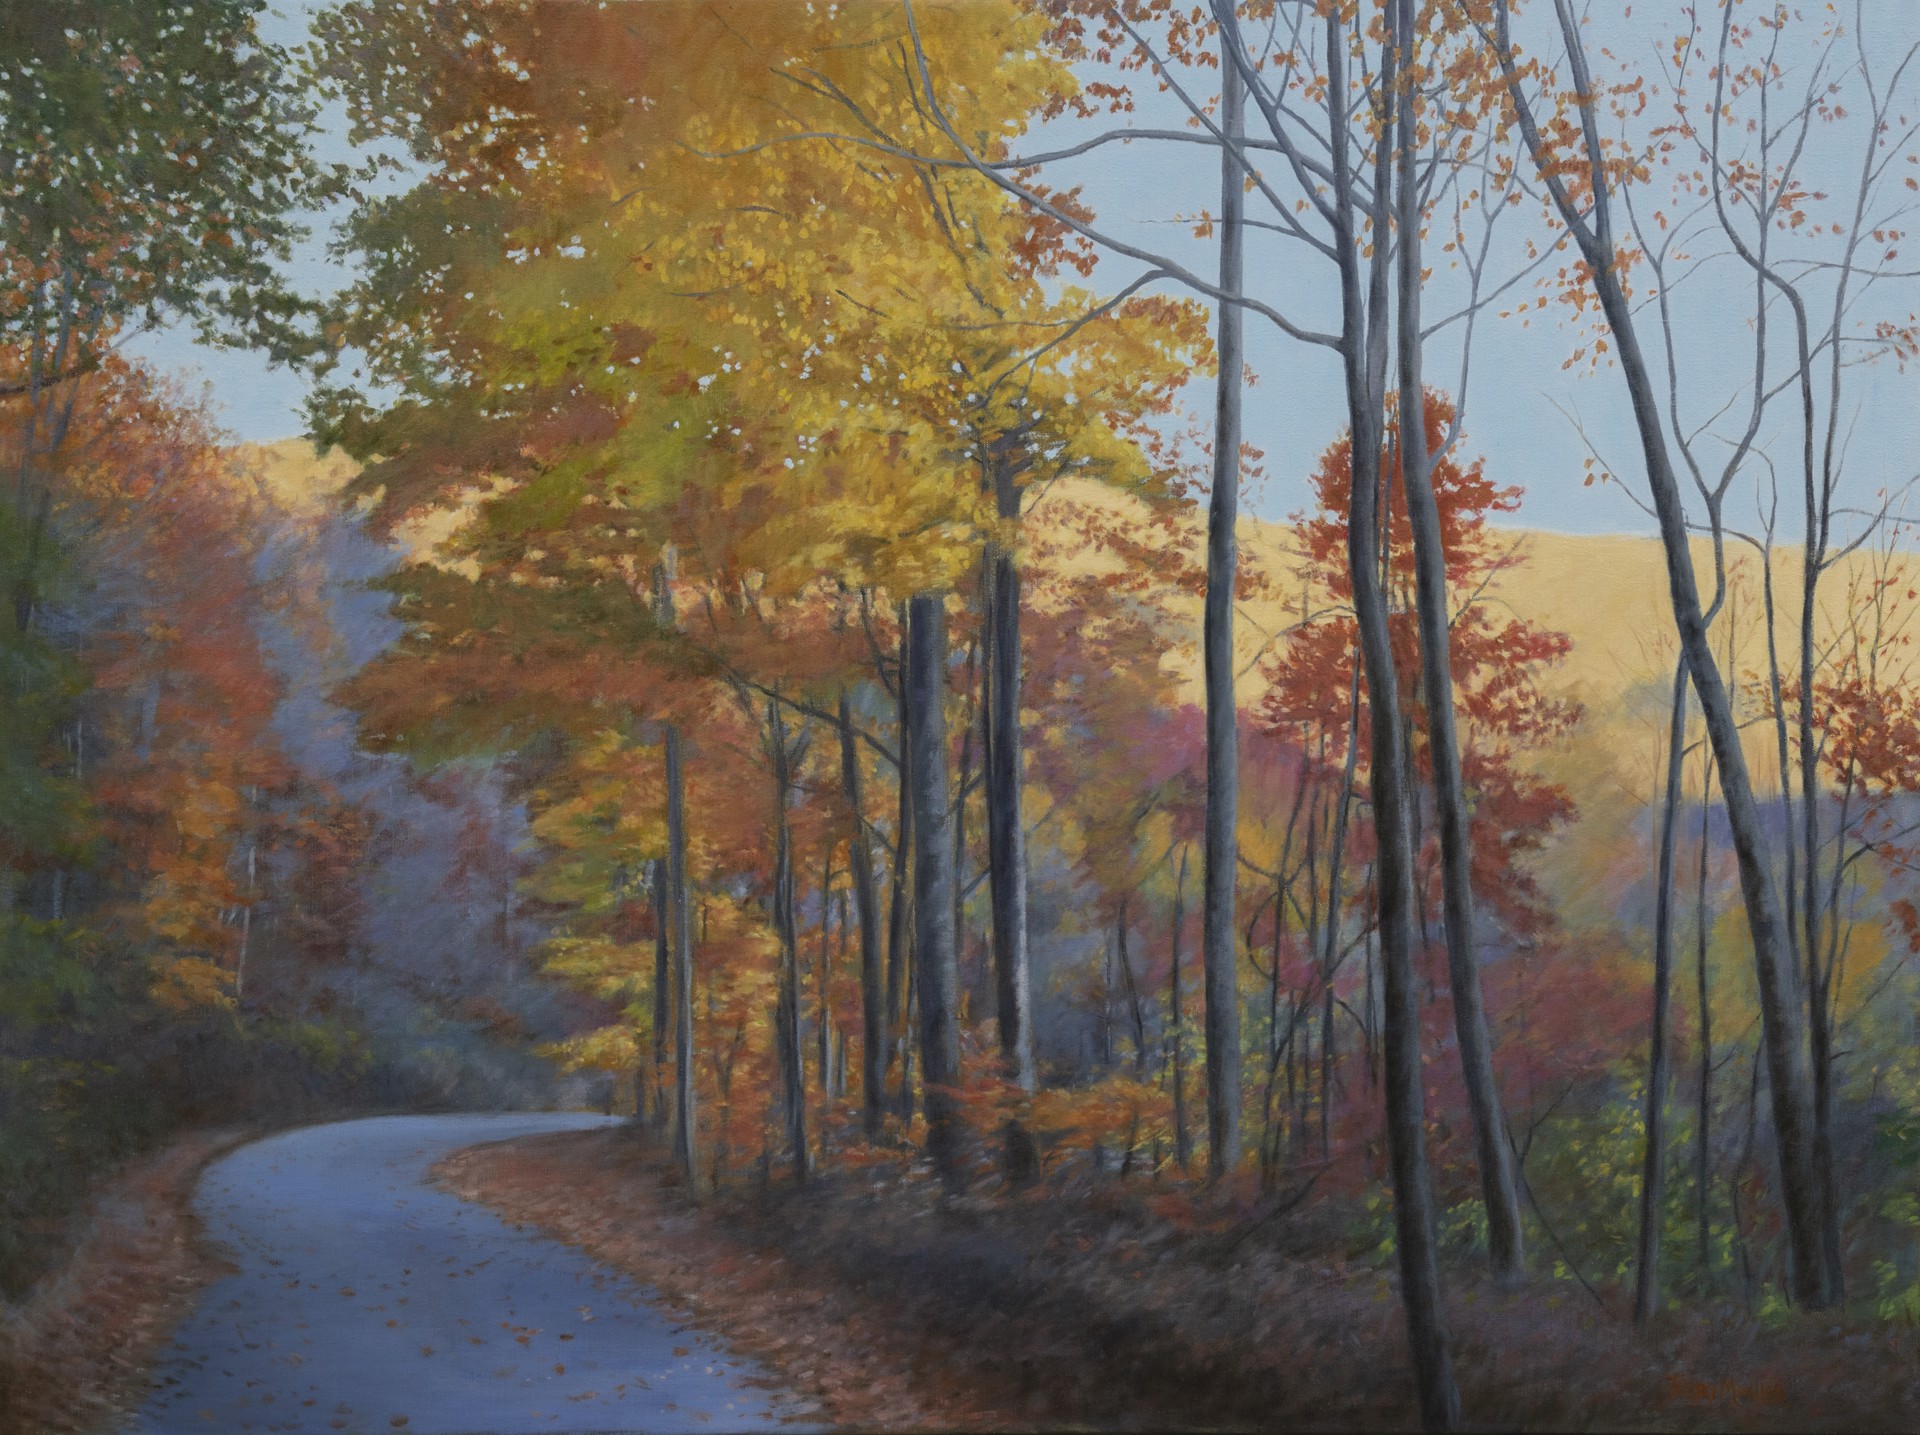 Road to the Valley # 3 by Terry Moeller